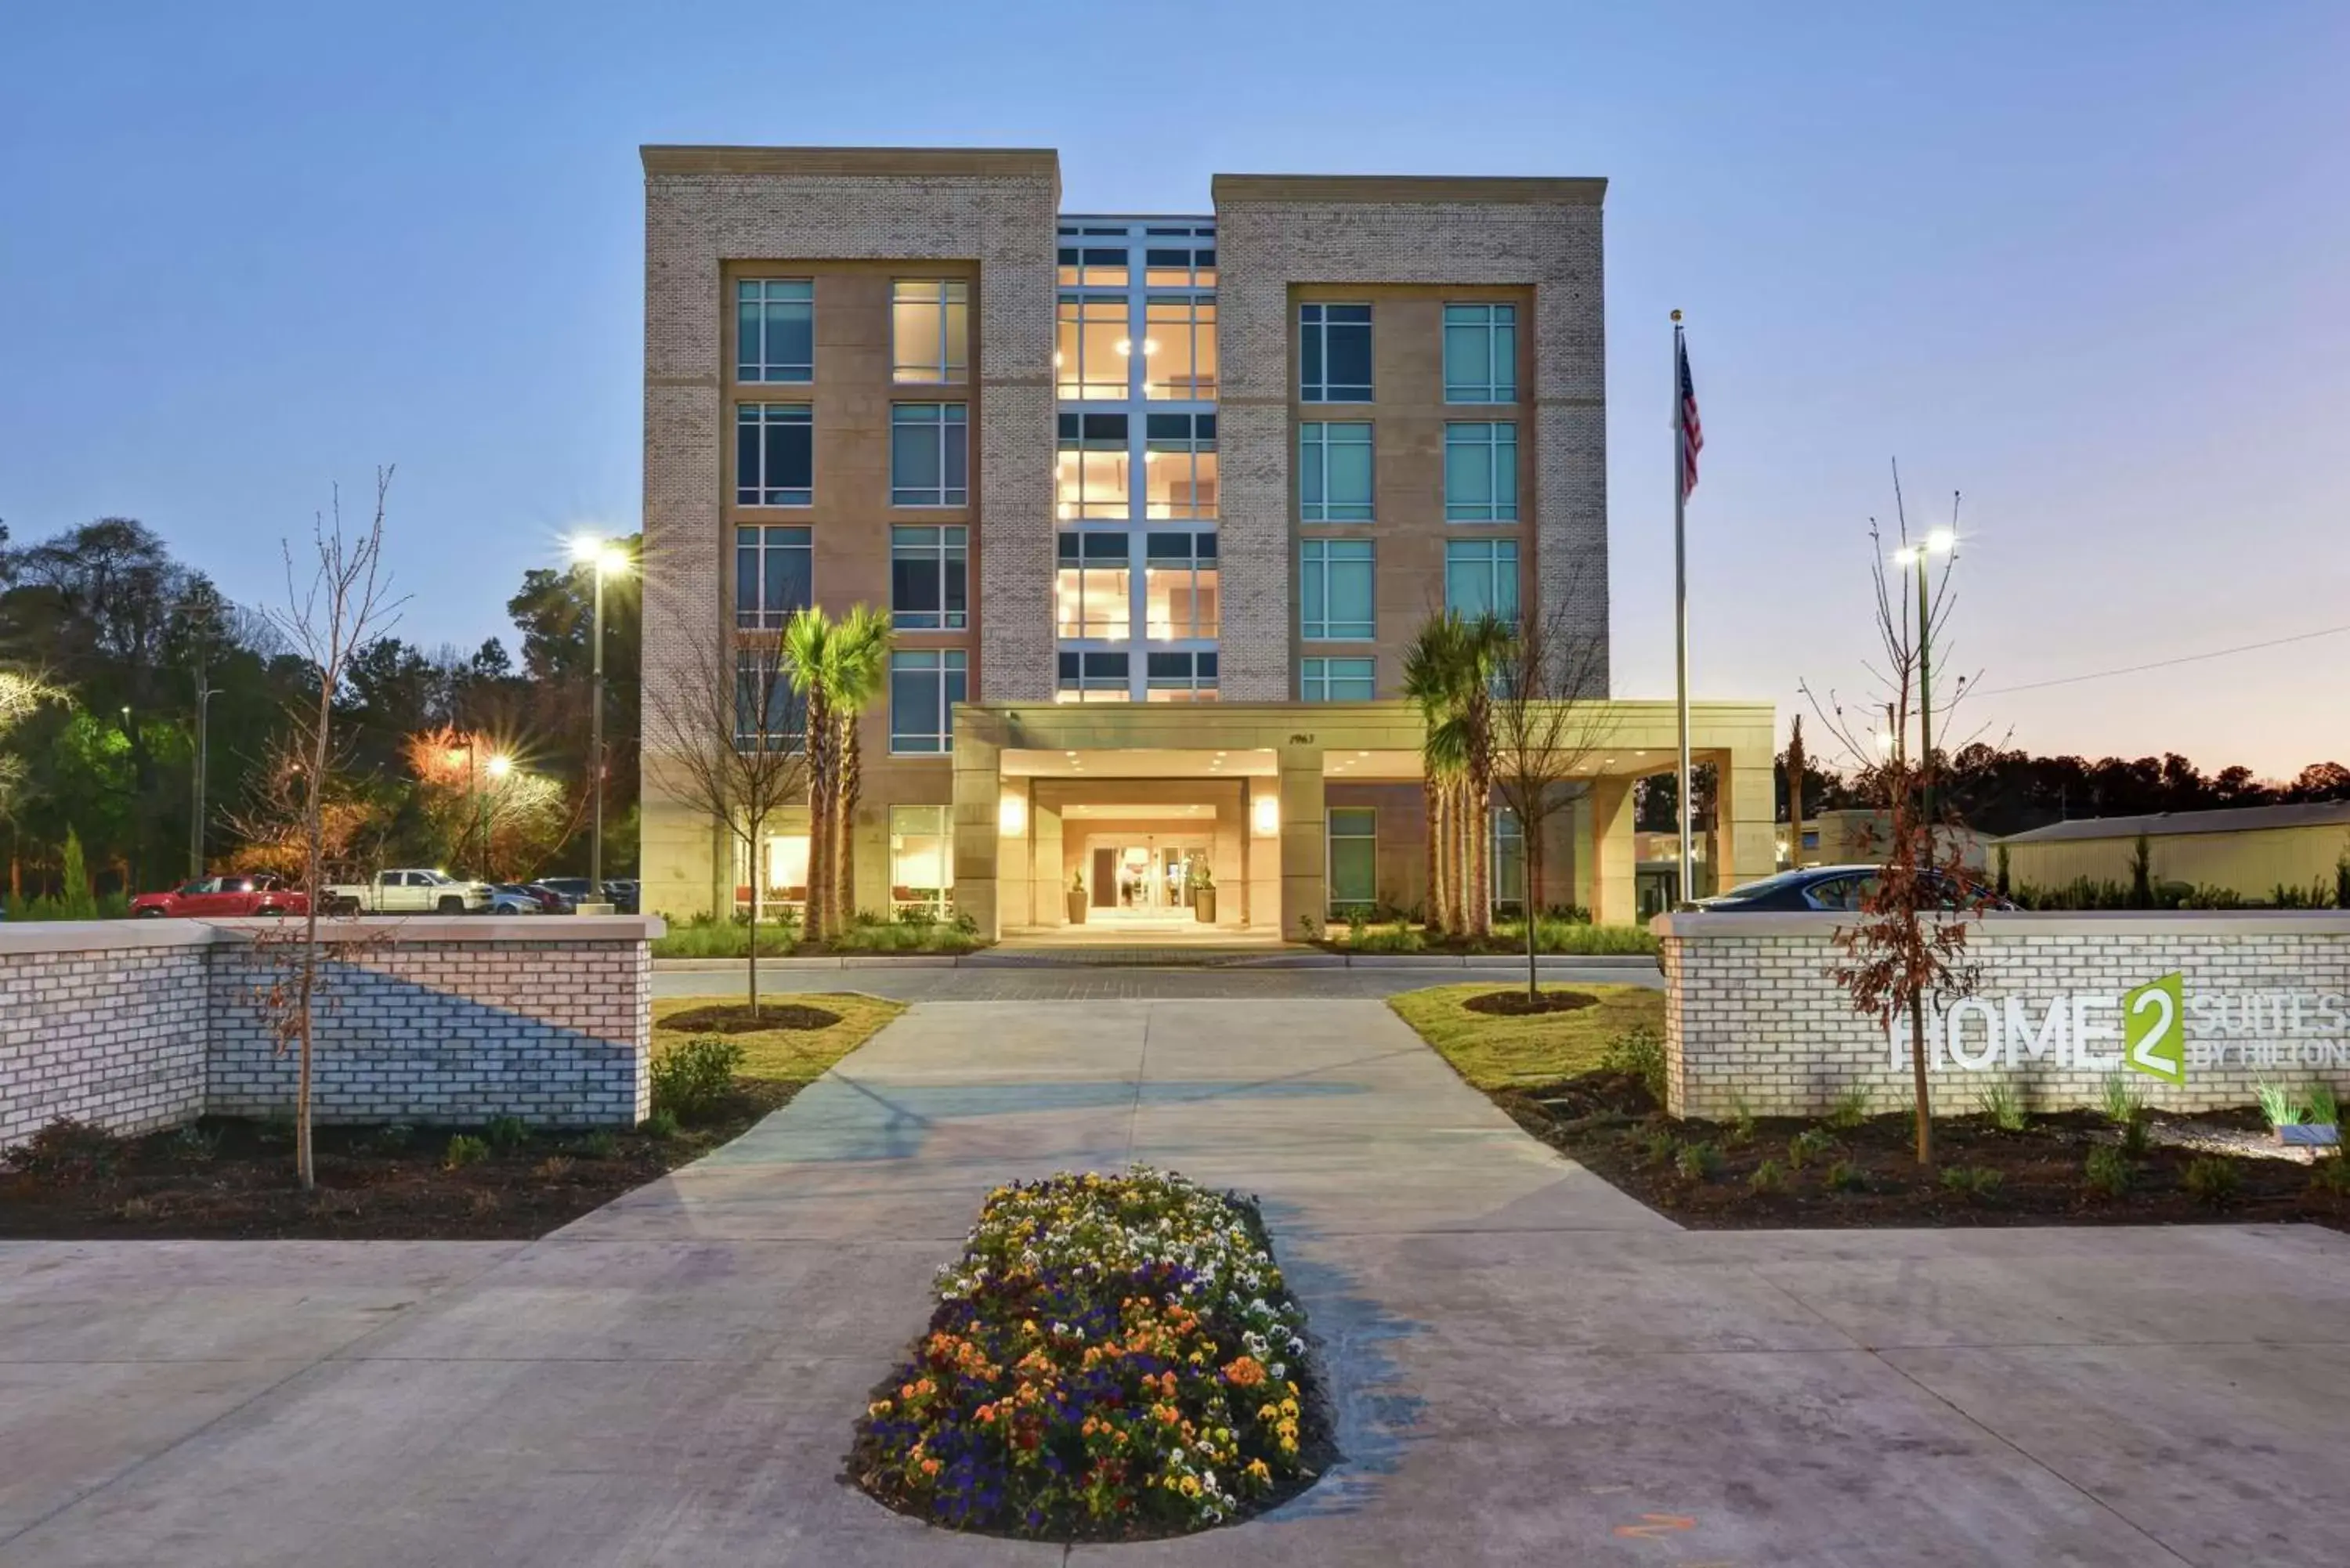 Property Building in Home2 Suites Charleston West Ashley